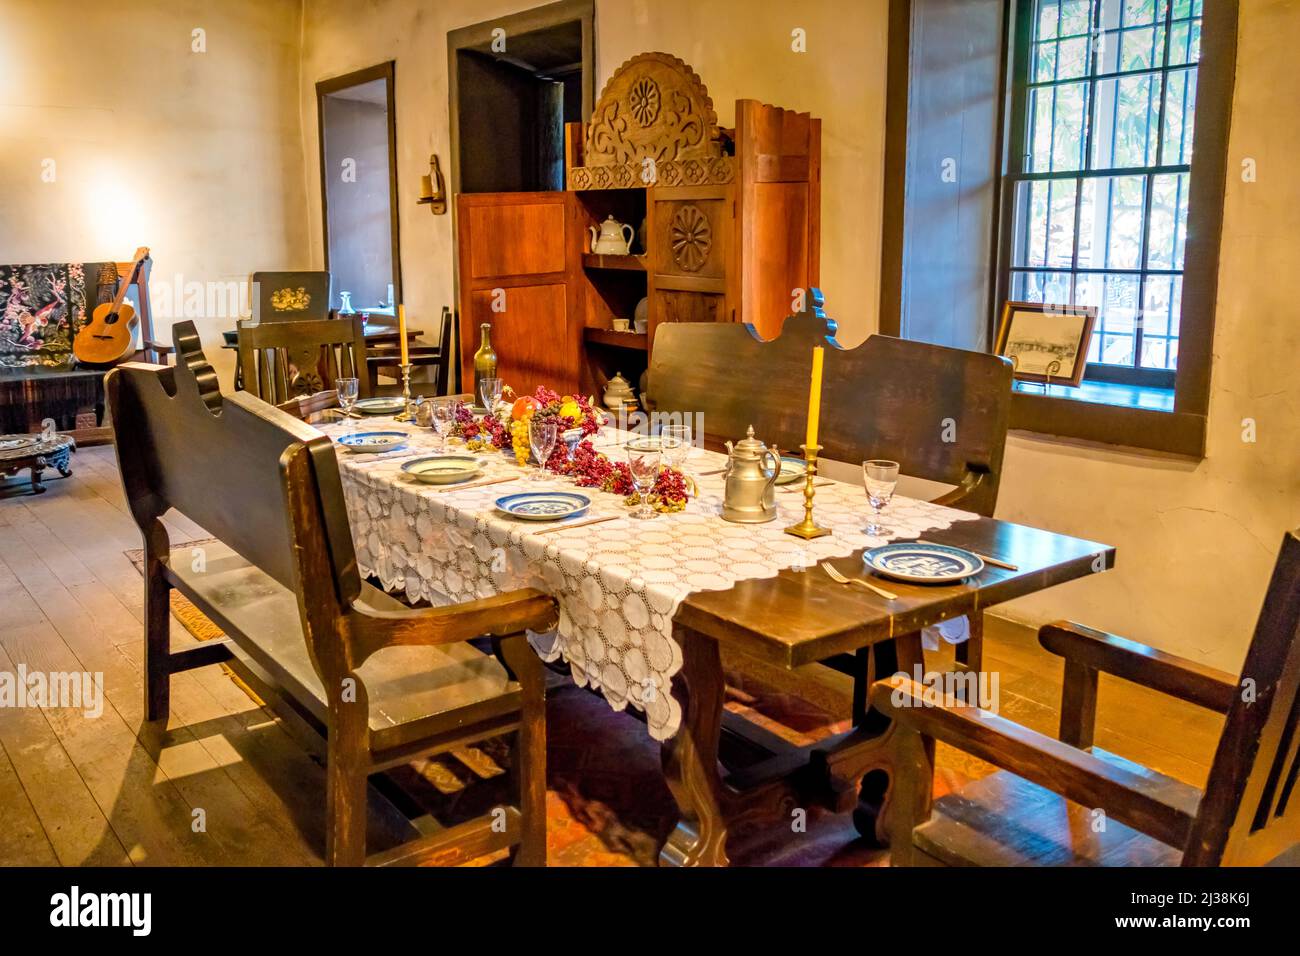 The interior of the Avila Adobe, the oldest House (1818) in the Olvera Street district, old town Los Angeles, California, USA. Stock Photo